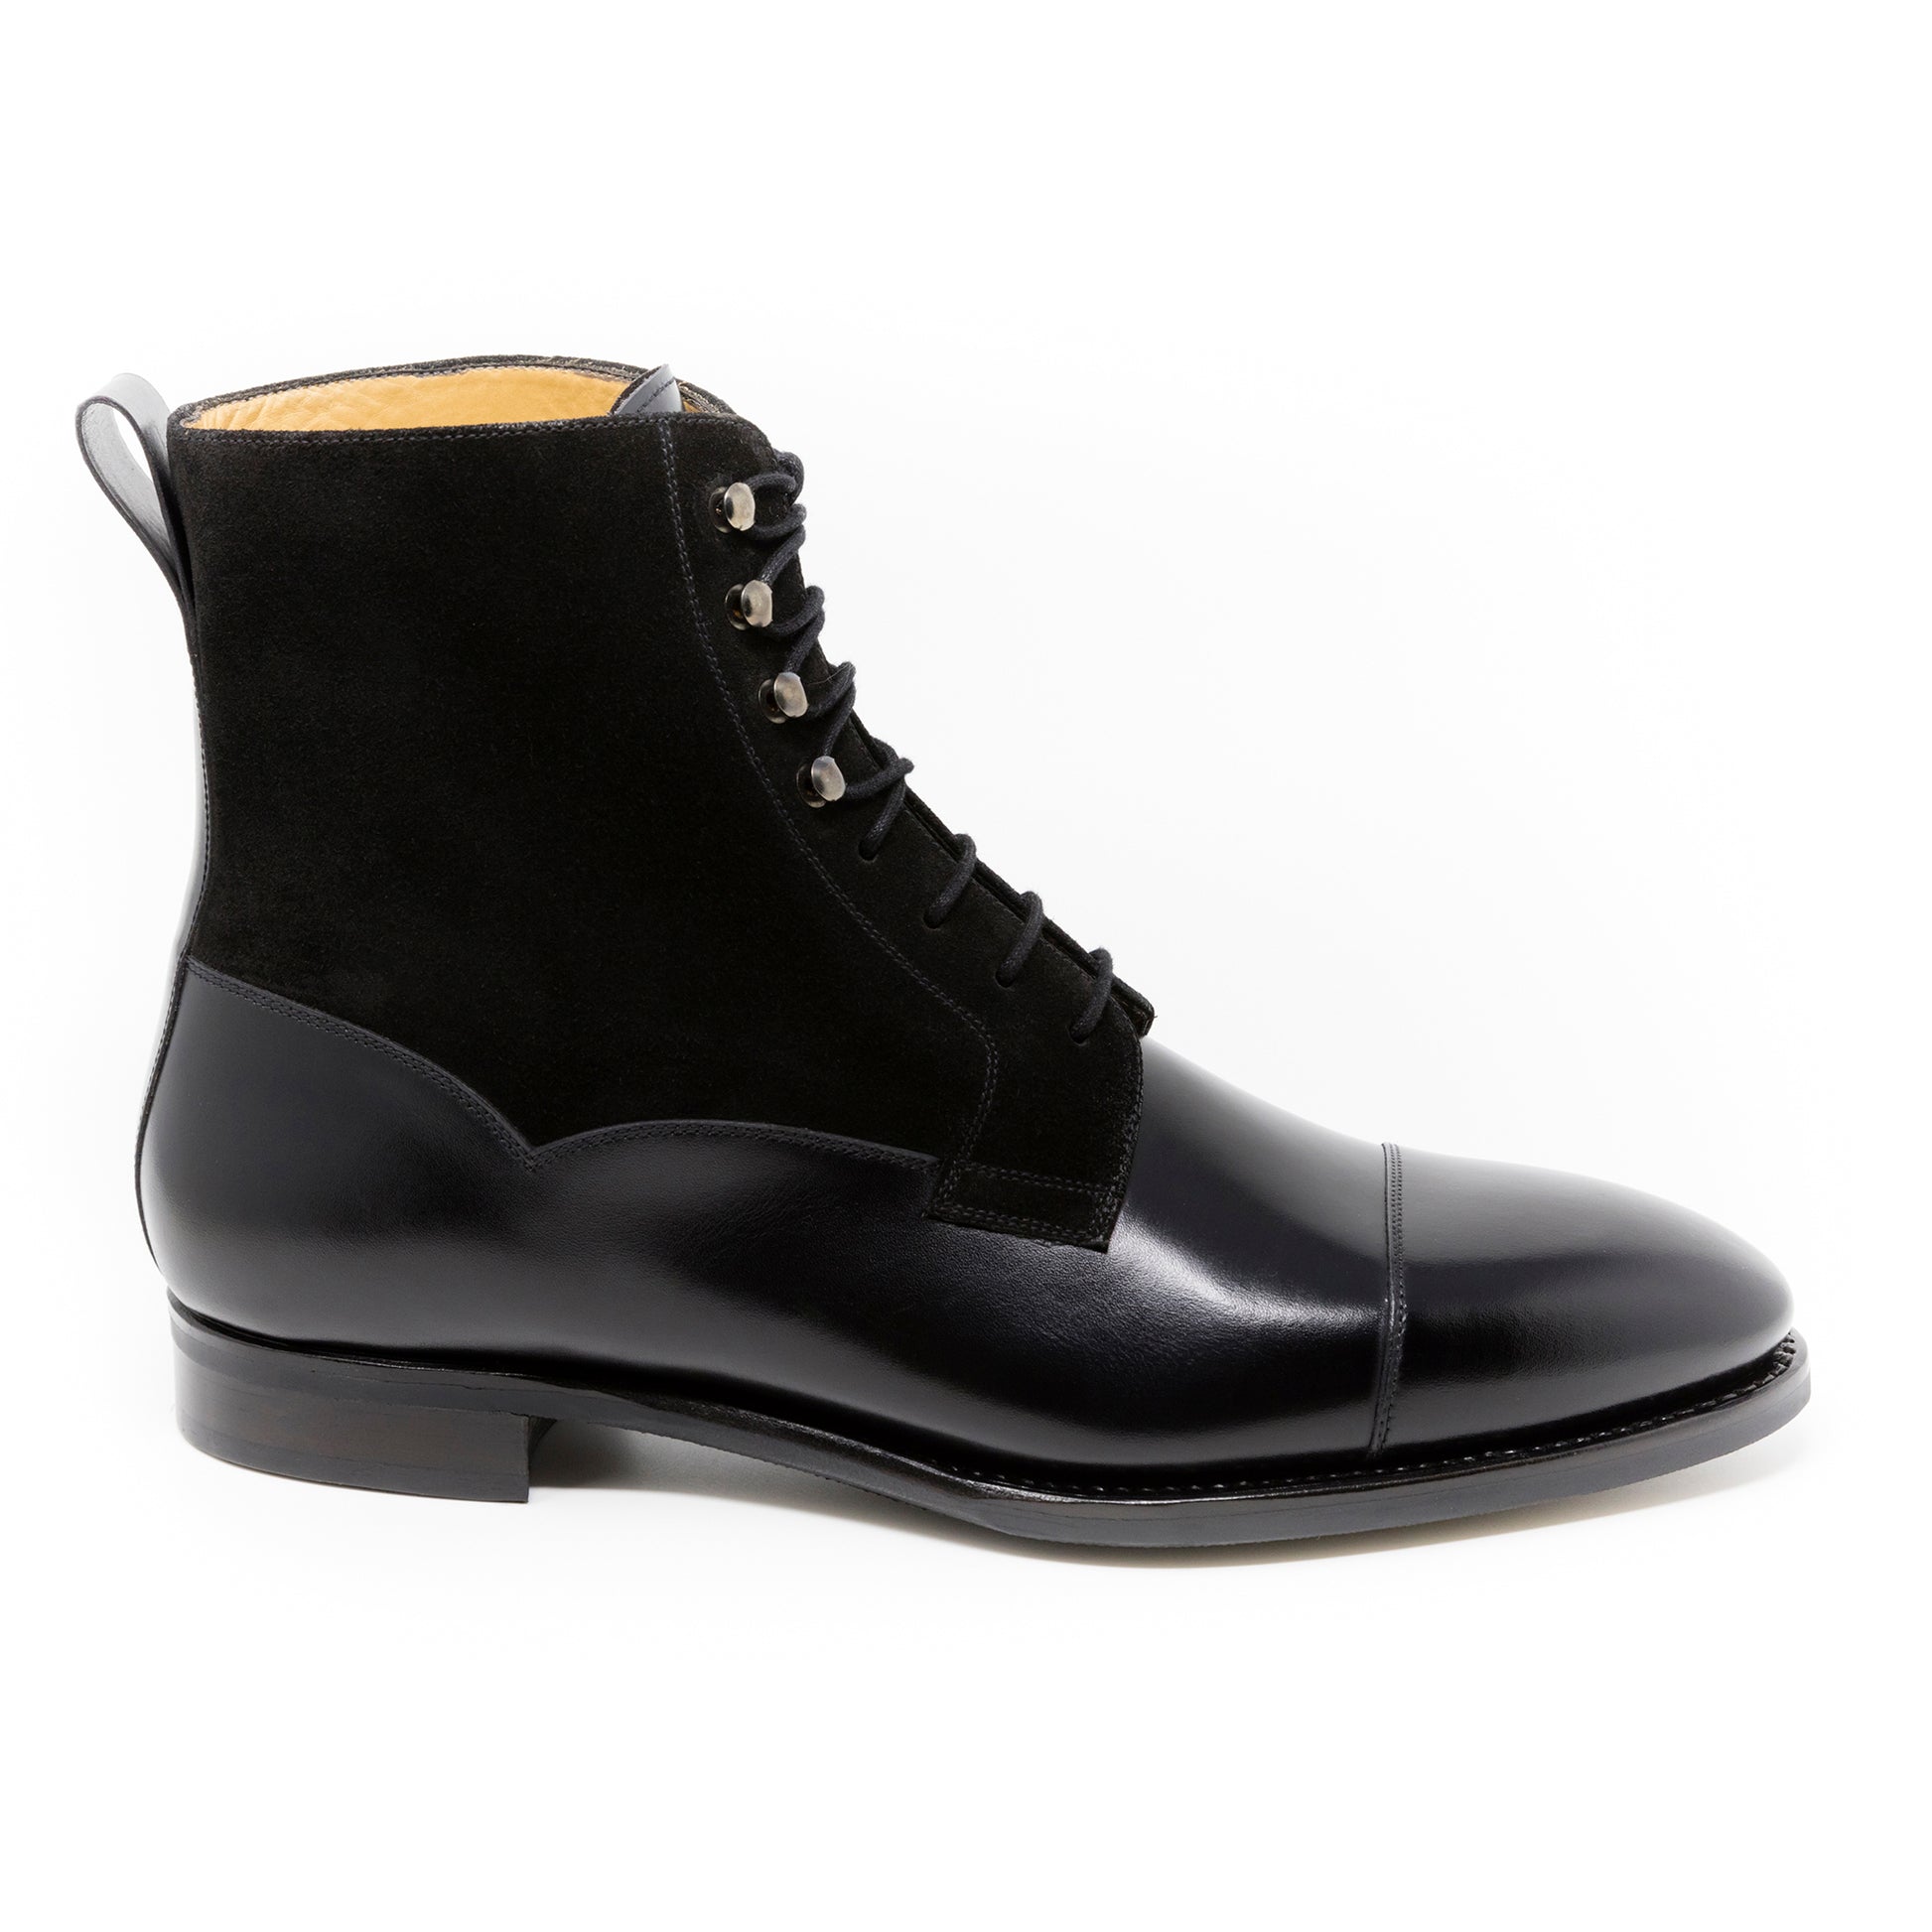 TLB Mallorca leather shoes 140 / GOYA / BOXCALF BLACK & SUEDE BLACK